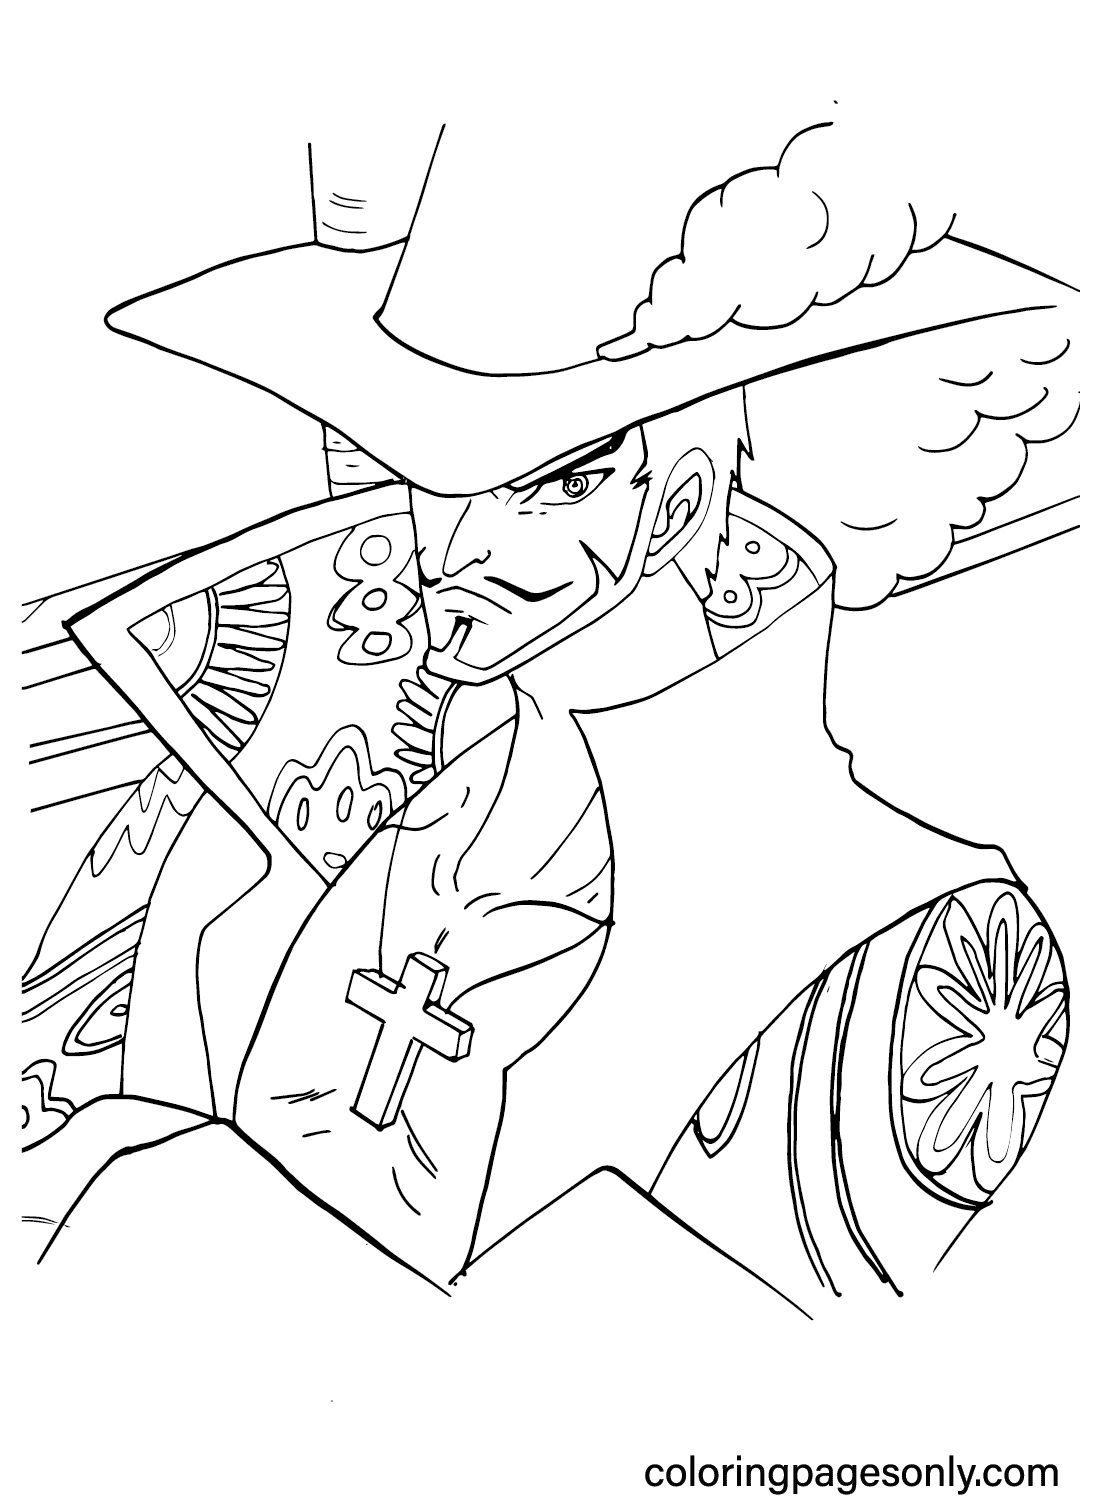 Mihawk Dracule Images to Color - Free Printable Coloring Pages